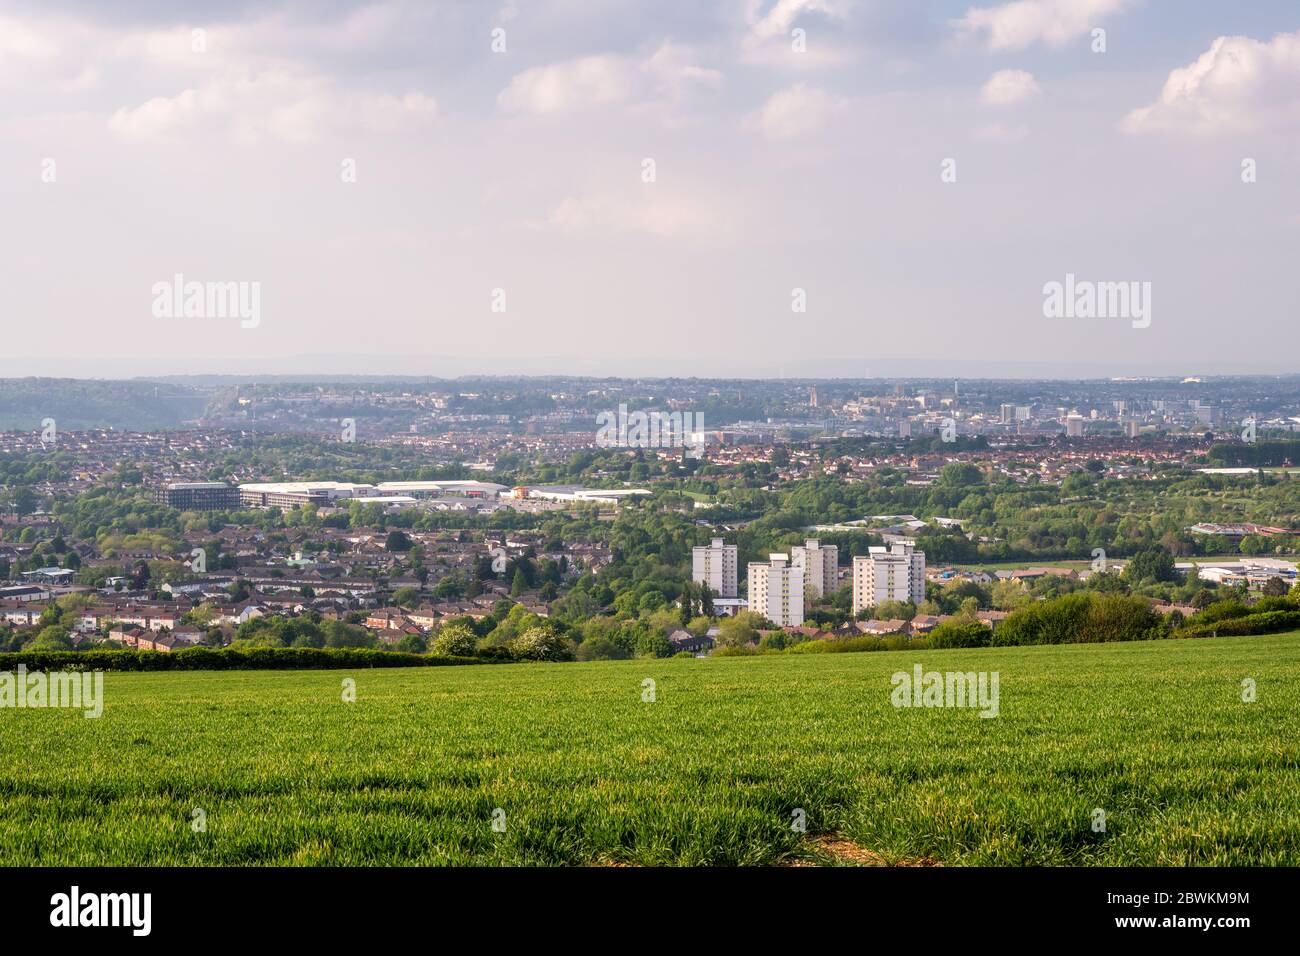 Bristol, England, UK - May 4, 2020:  The cityscape of South Bristol is dominated by the Imperial Park shopping centre and tower blocks of the Hartclif Stock Photo